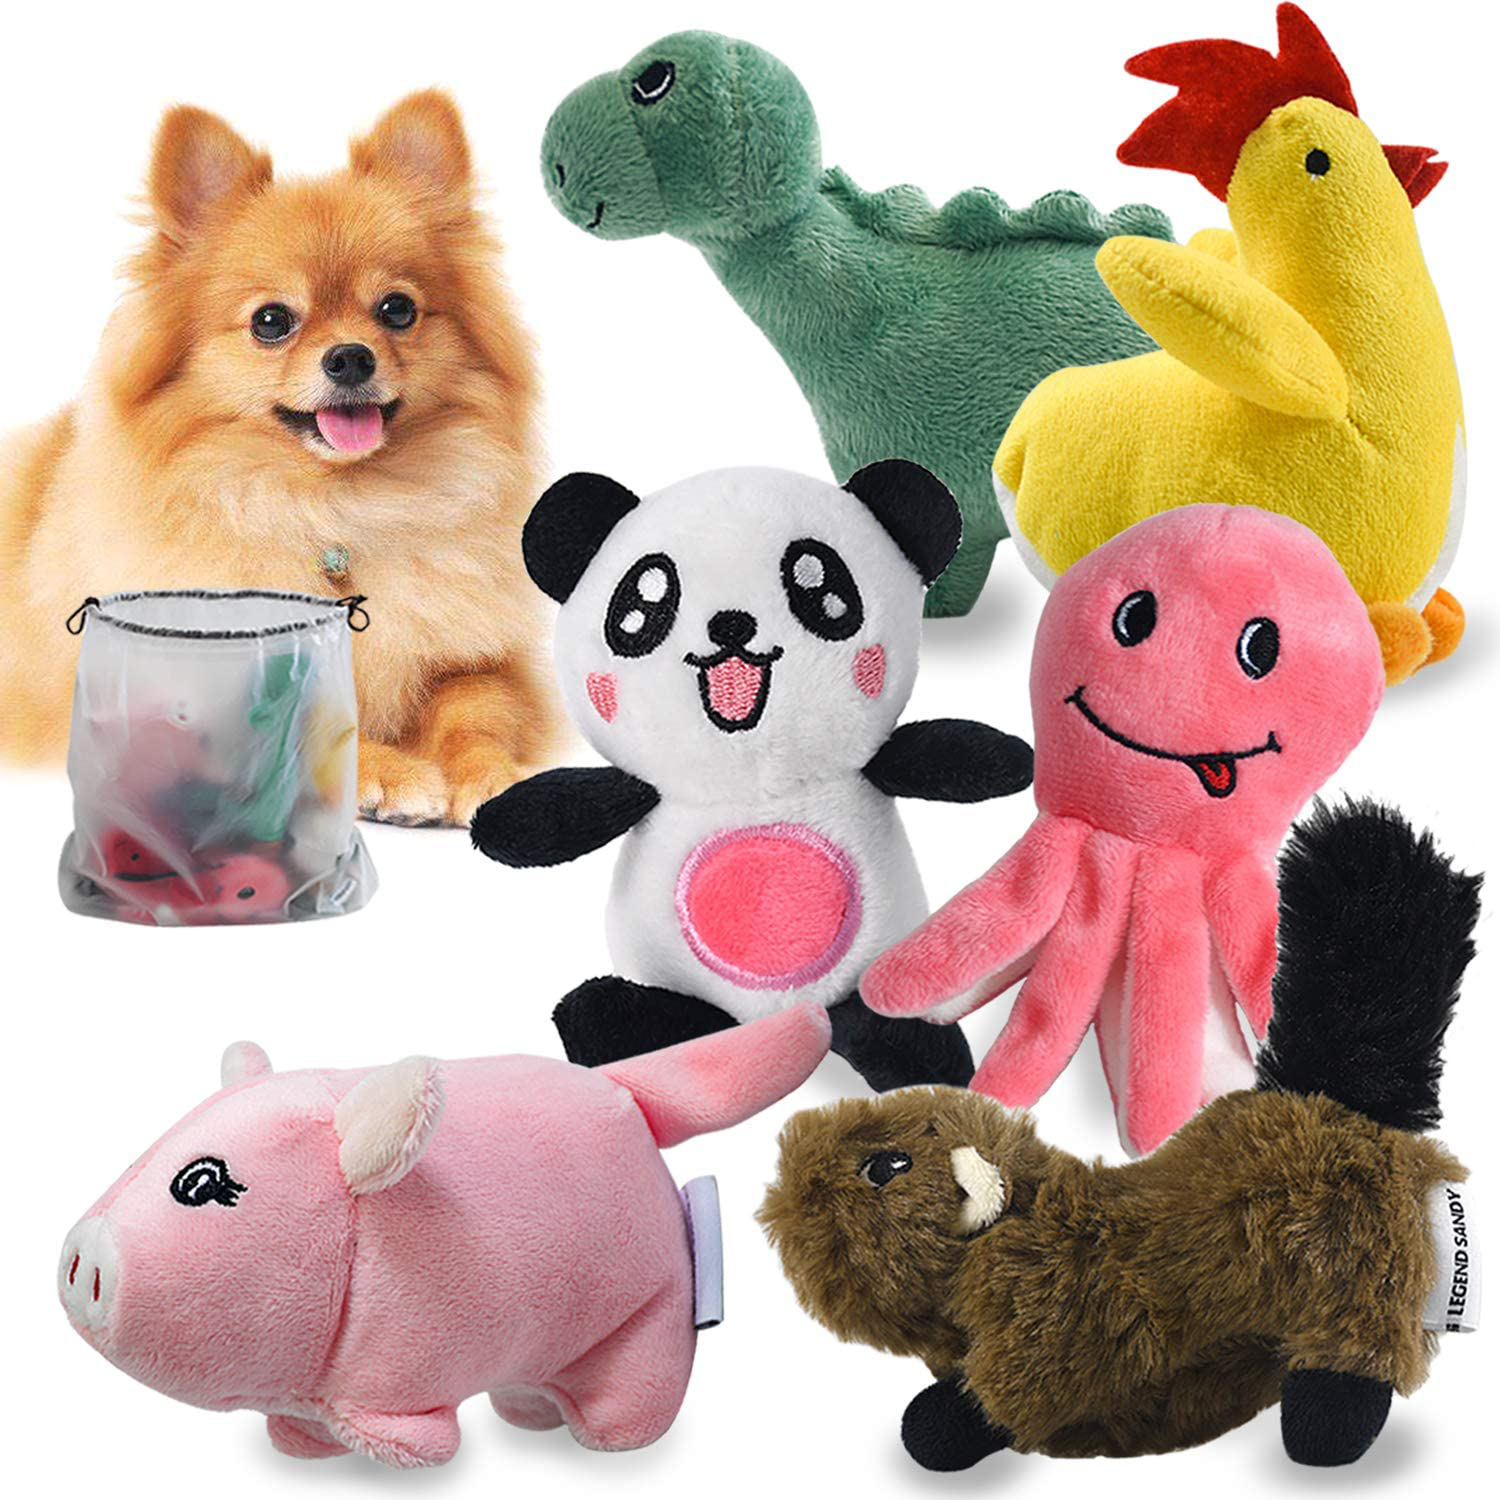 Squeaky Dog Toys for Puppy Small Medium Dogs, Stuffed Samll Dog Toys Bulk with 12 Plush Pet Dog Toy Set, Cute Safe Dog Chew Toys Pack for Puppies Teething Animals & Pet Supplies > Pet Supplies > Dog Supplies > Dog Toys LEGEND SANDY 6 Dog Toys  